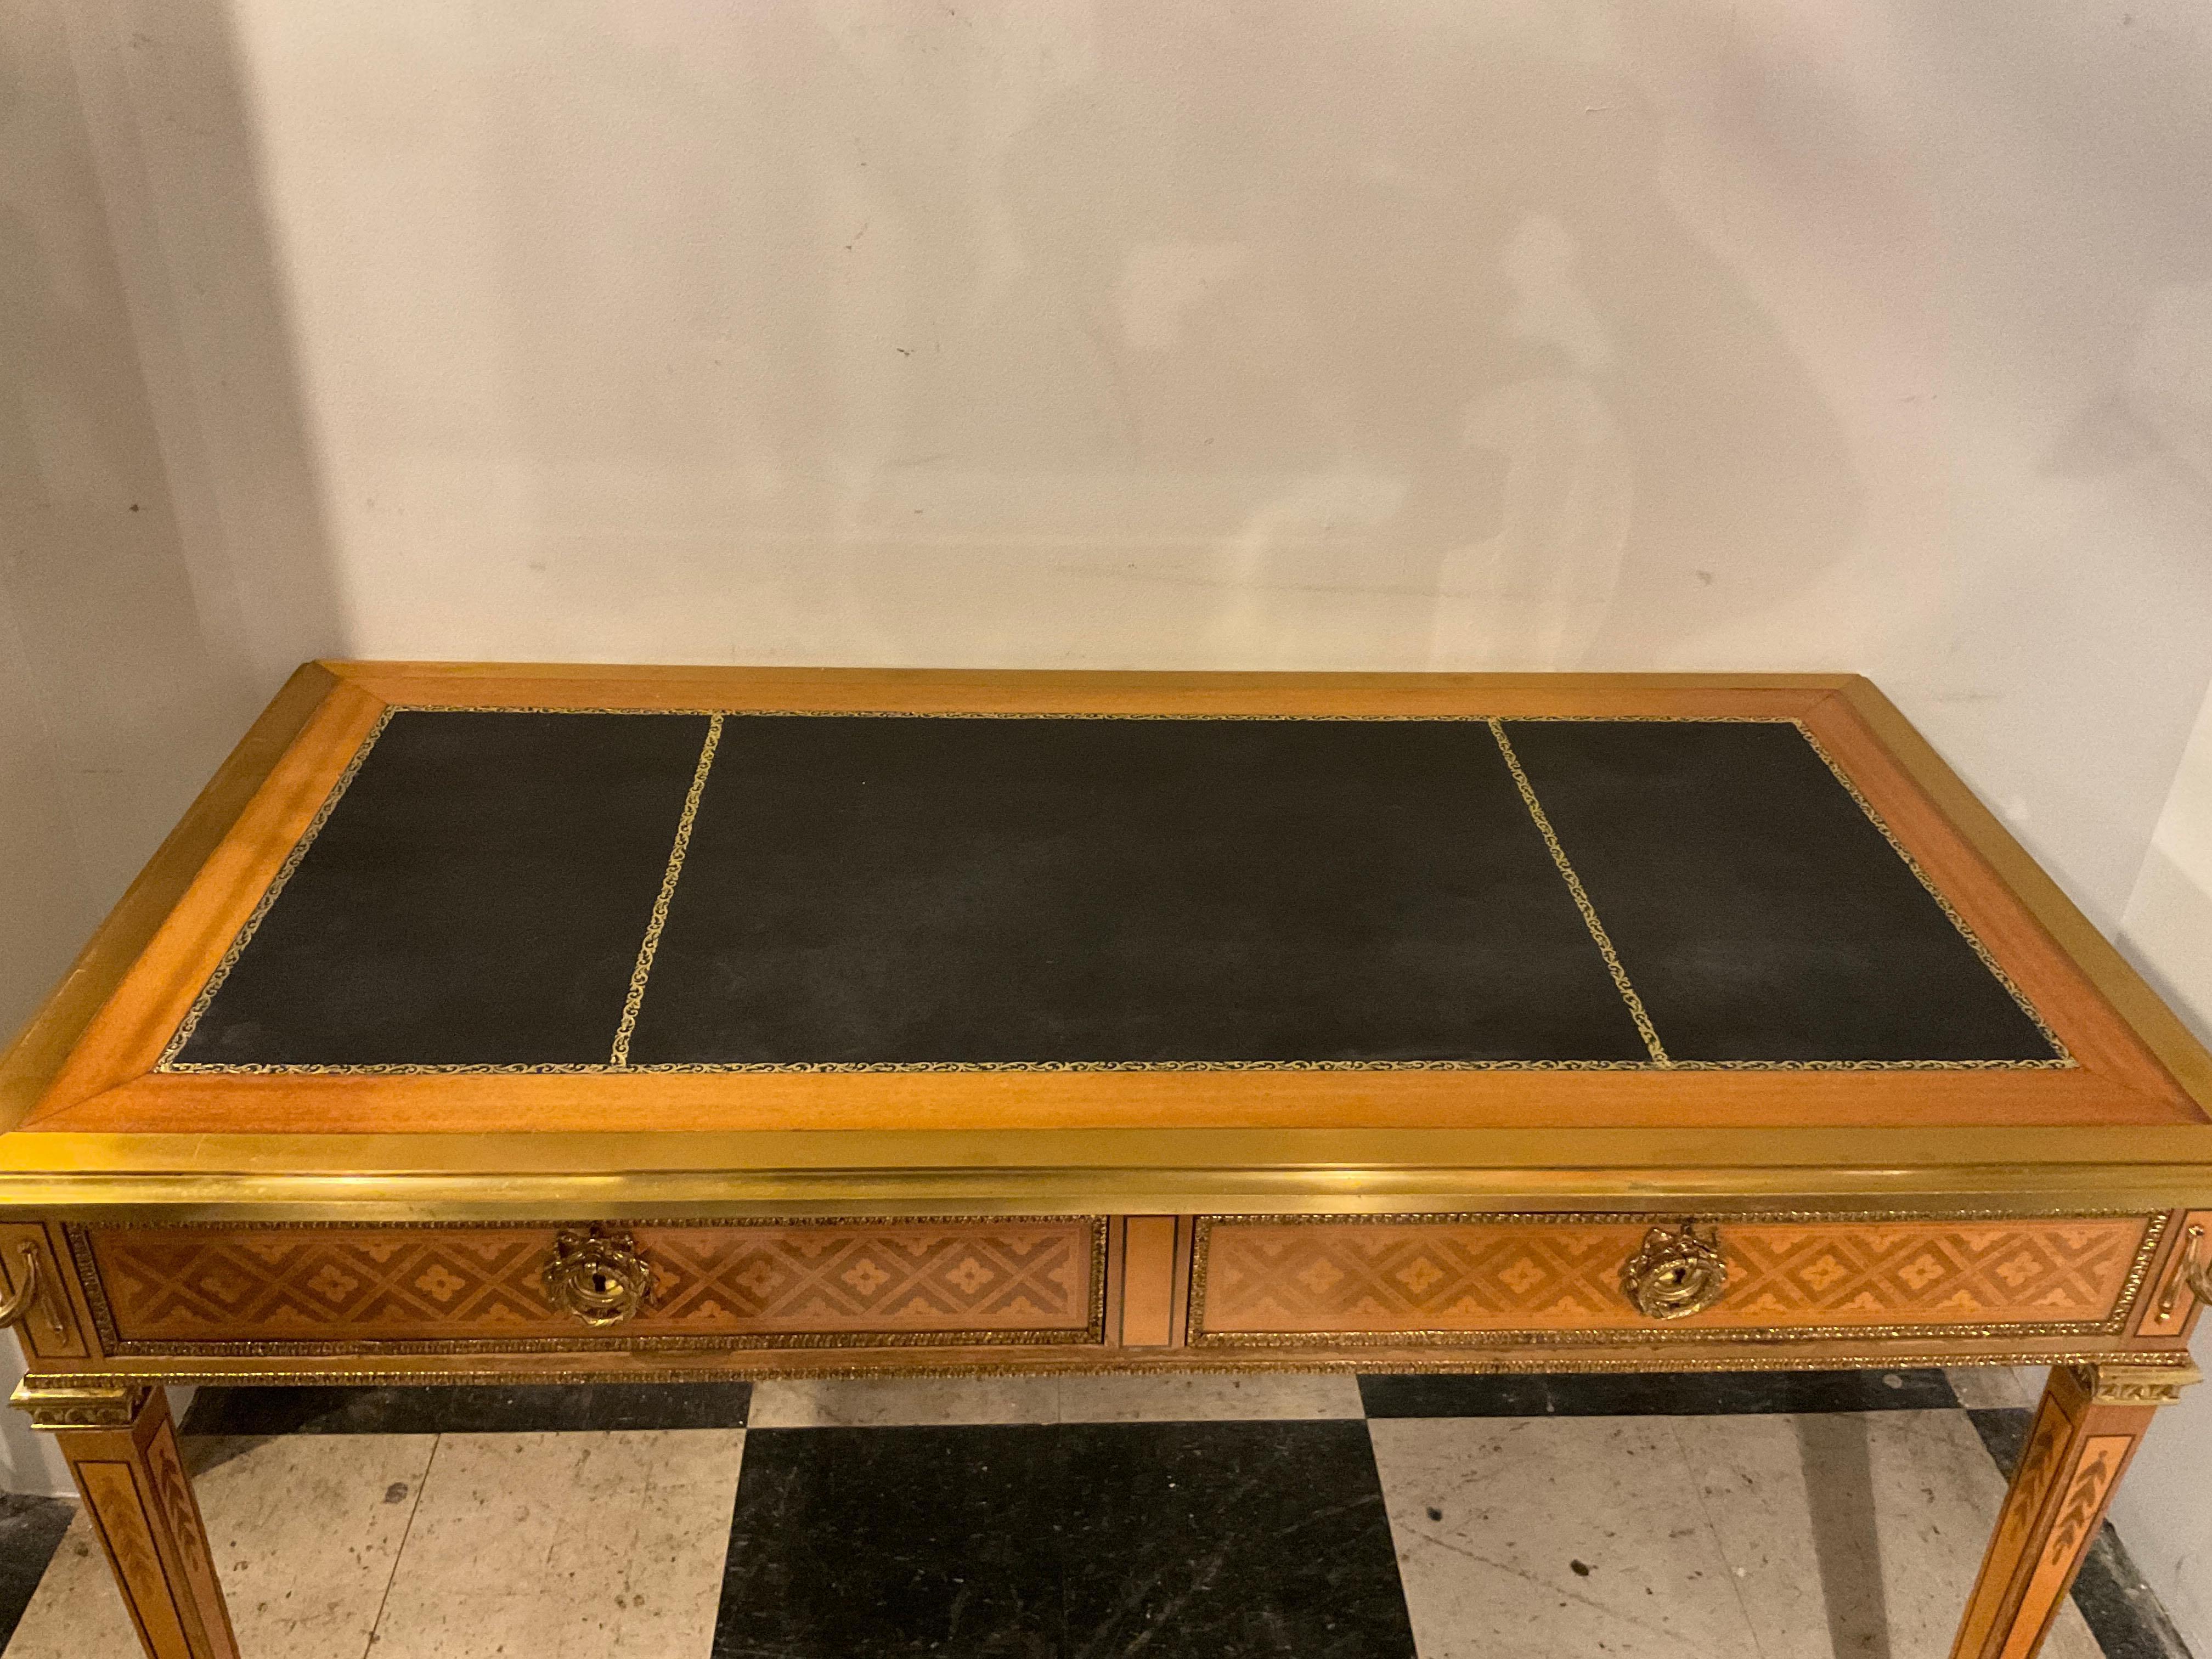 French Inlay writing desk with leather top. Finished on both sides. Back has 2 faux drawers. One front drawer is lighter then the other, as shown in image 9.